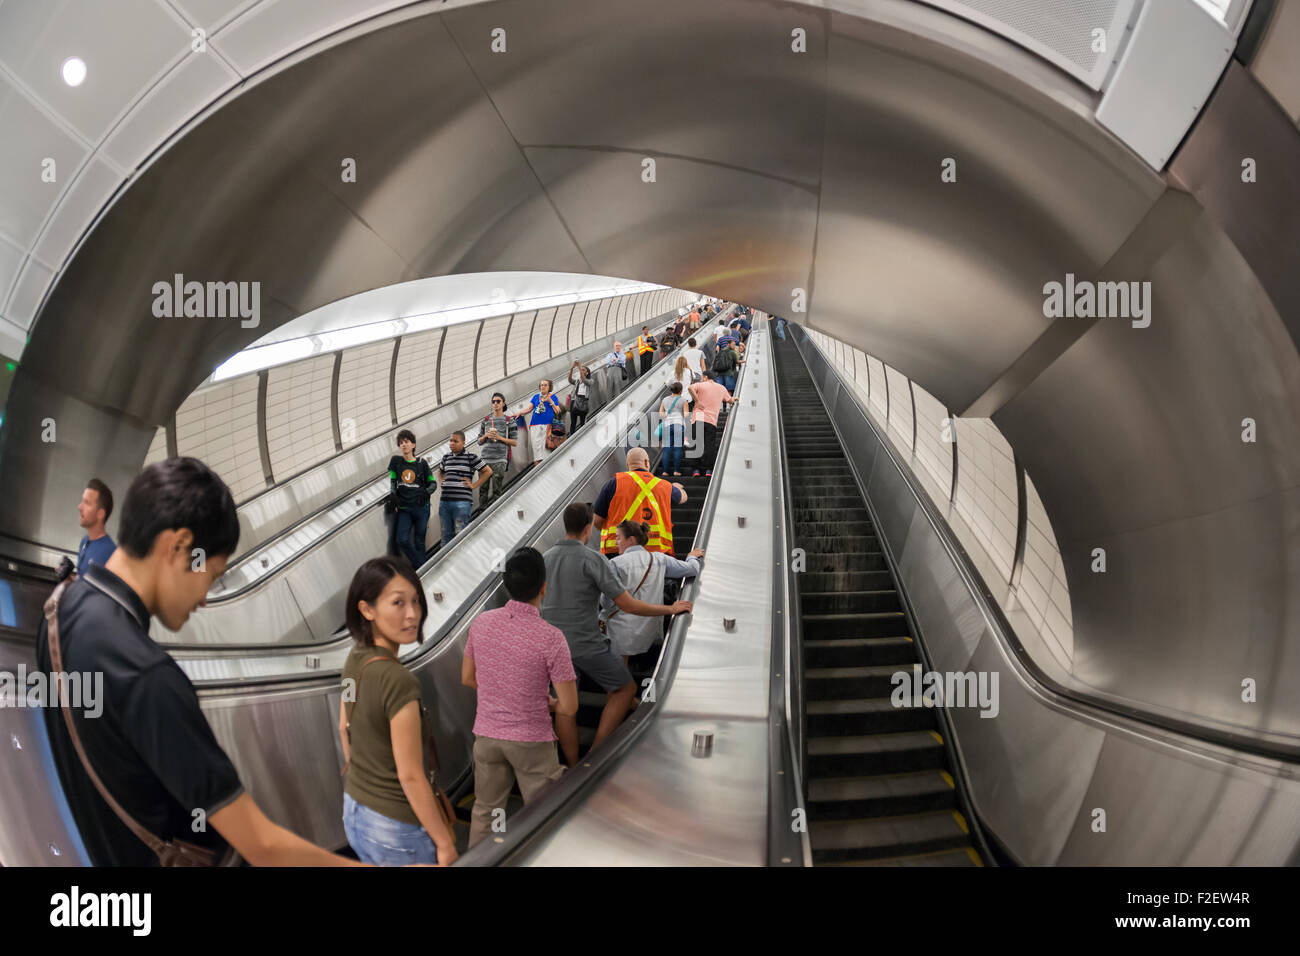 Visitors ride the escalators in the new 34th Street-Hudson Yards terminal station on the 7 Subway line extension in New York on its grand opening, Sunday, September 13, 2015.  The new tunnel from Times Square  terminates 108 feet below street level at West 34th Street and Eleventh Avenue at the doorstep of the rezoned 45 block Hudson Yards development. It is the first subway station to open in 26 years and the first line extension in 60 years. (© Richard B. Levine) Stock Photo